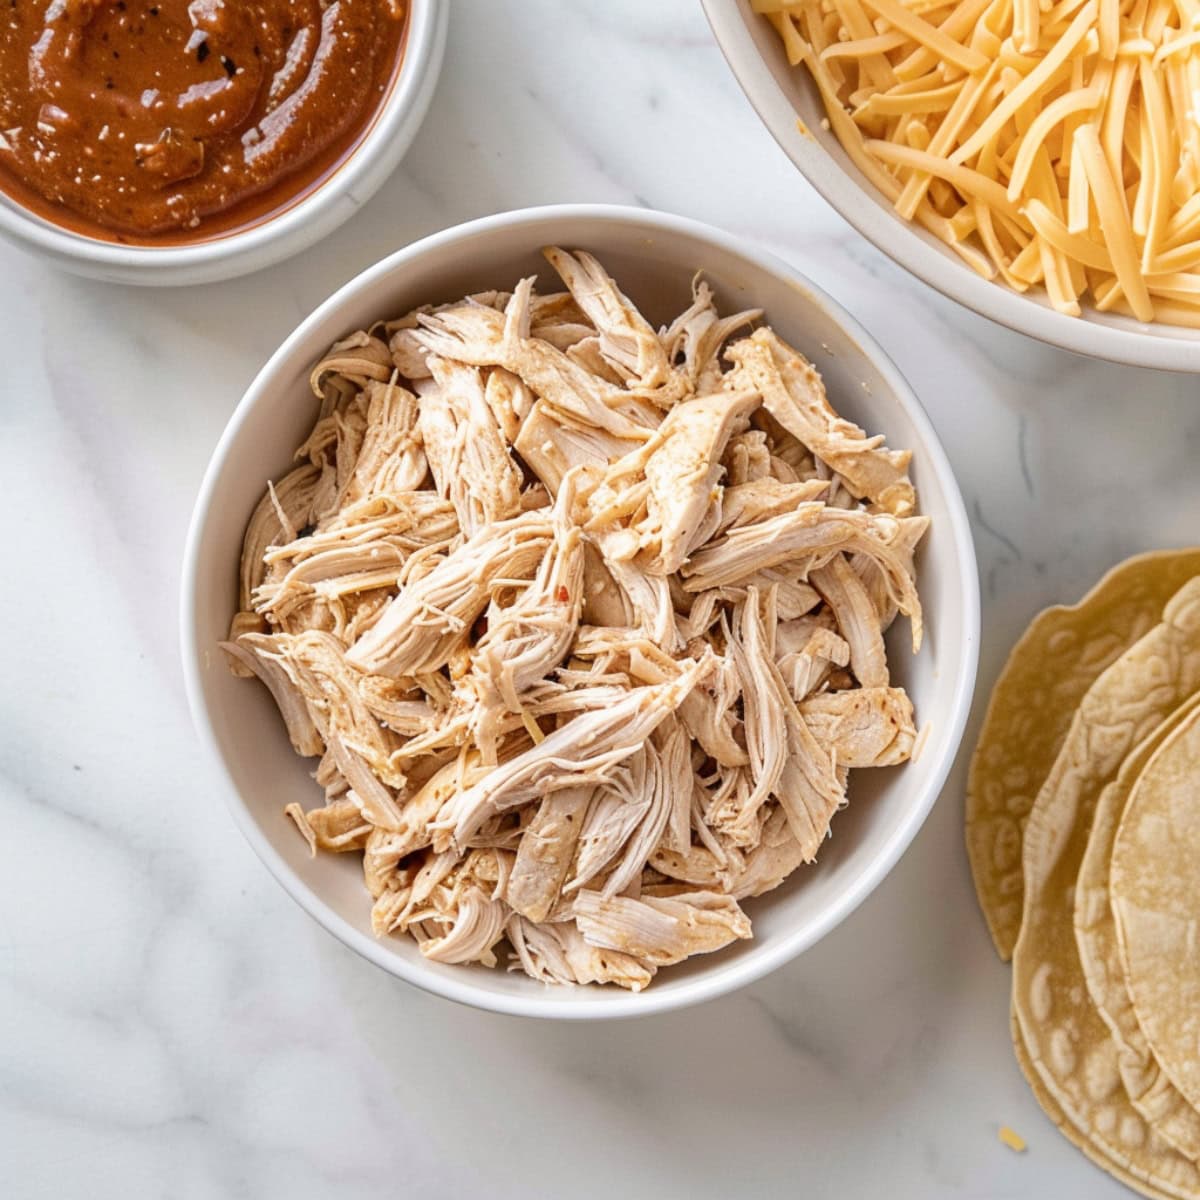 Corn tortillas with bowls of shredded chicken, enchilada sauce and shredded cheese.